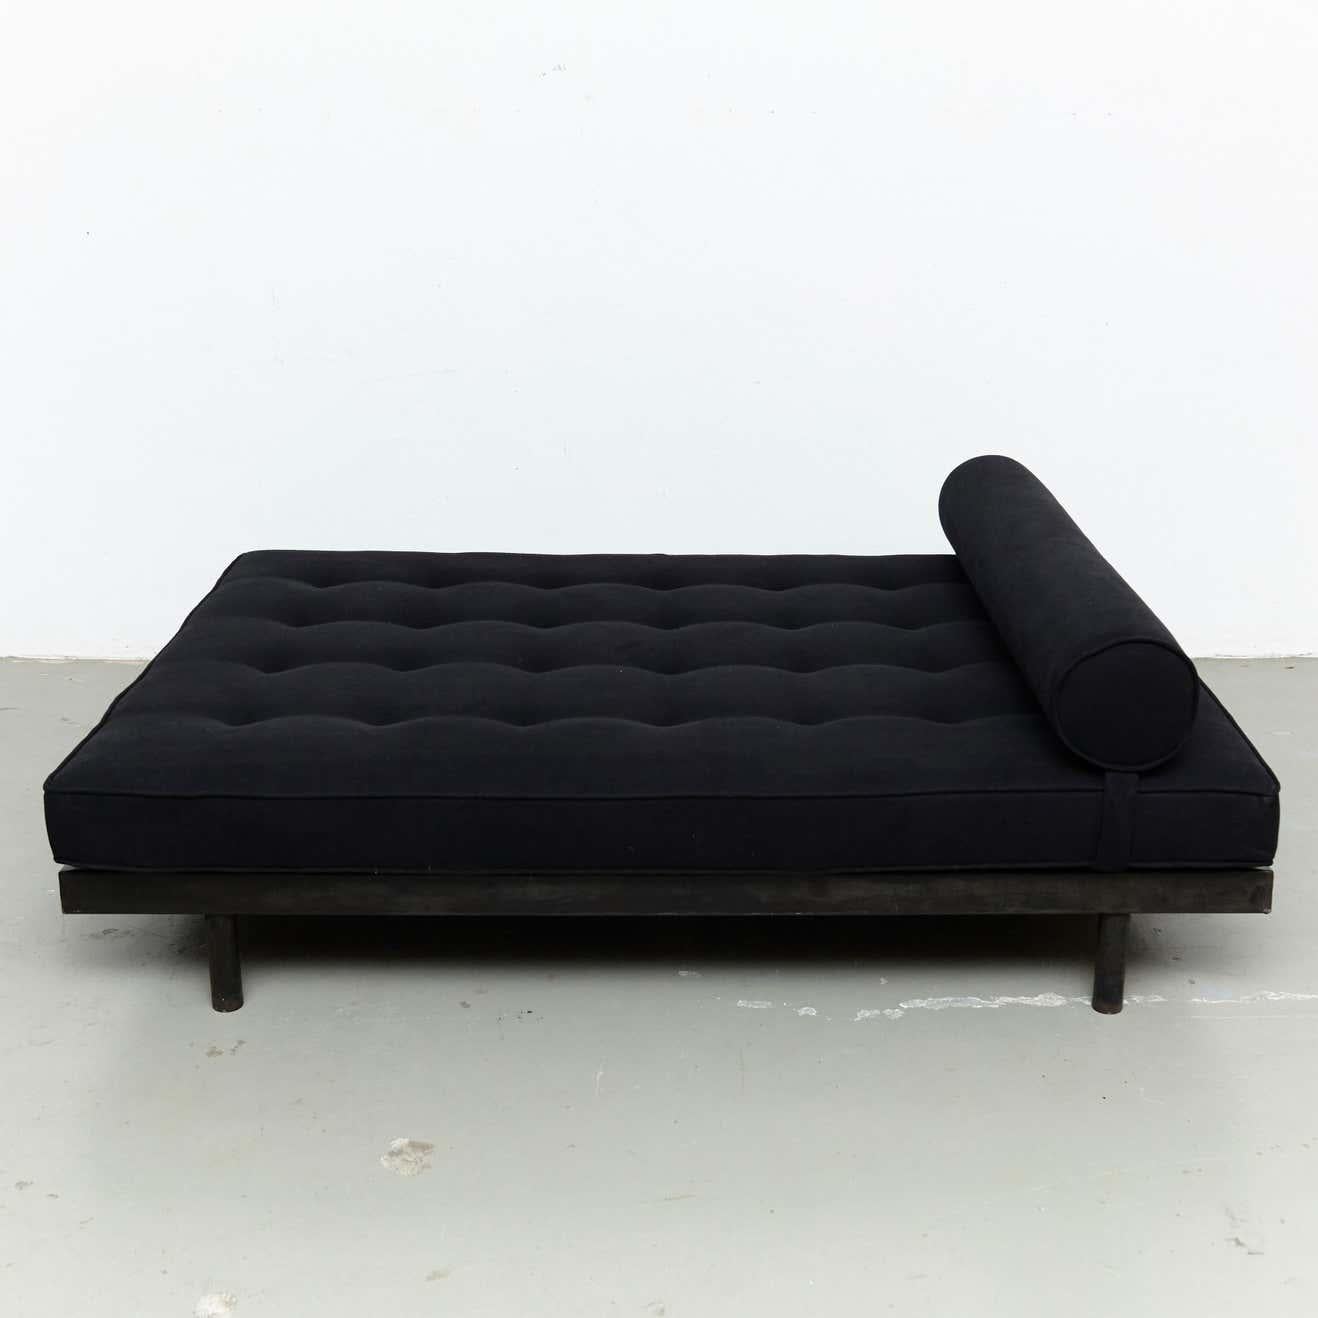 Jean Prouvé S.C.A.L. Double Daybed, circa 1950 For Sale 3